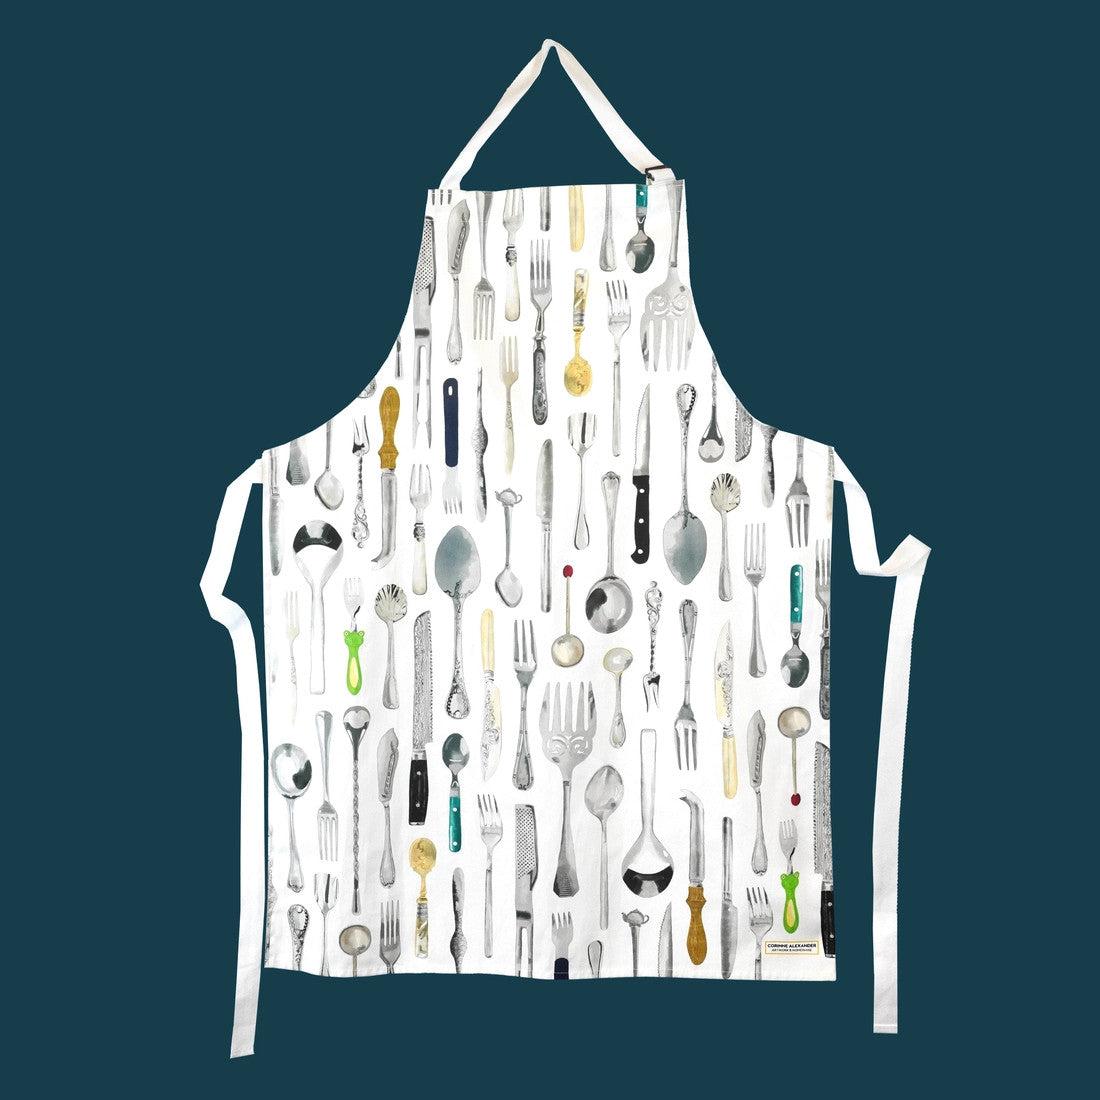 The Cutlery Draw Apron by Corinne Alexander.